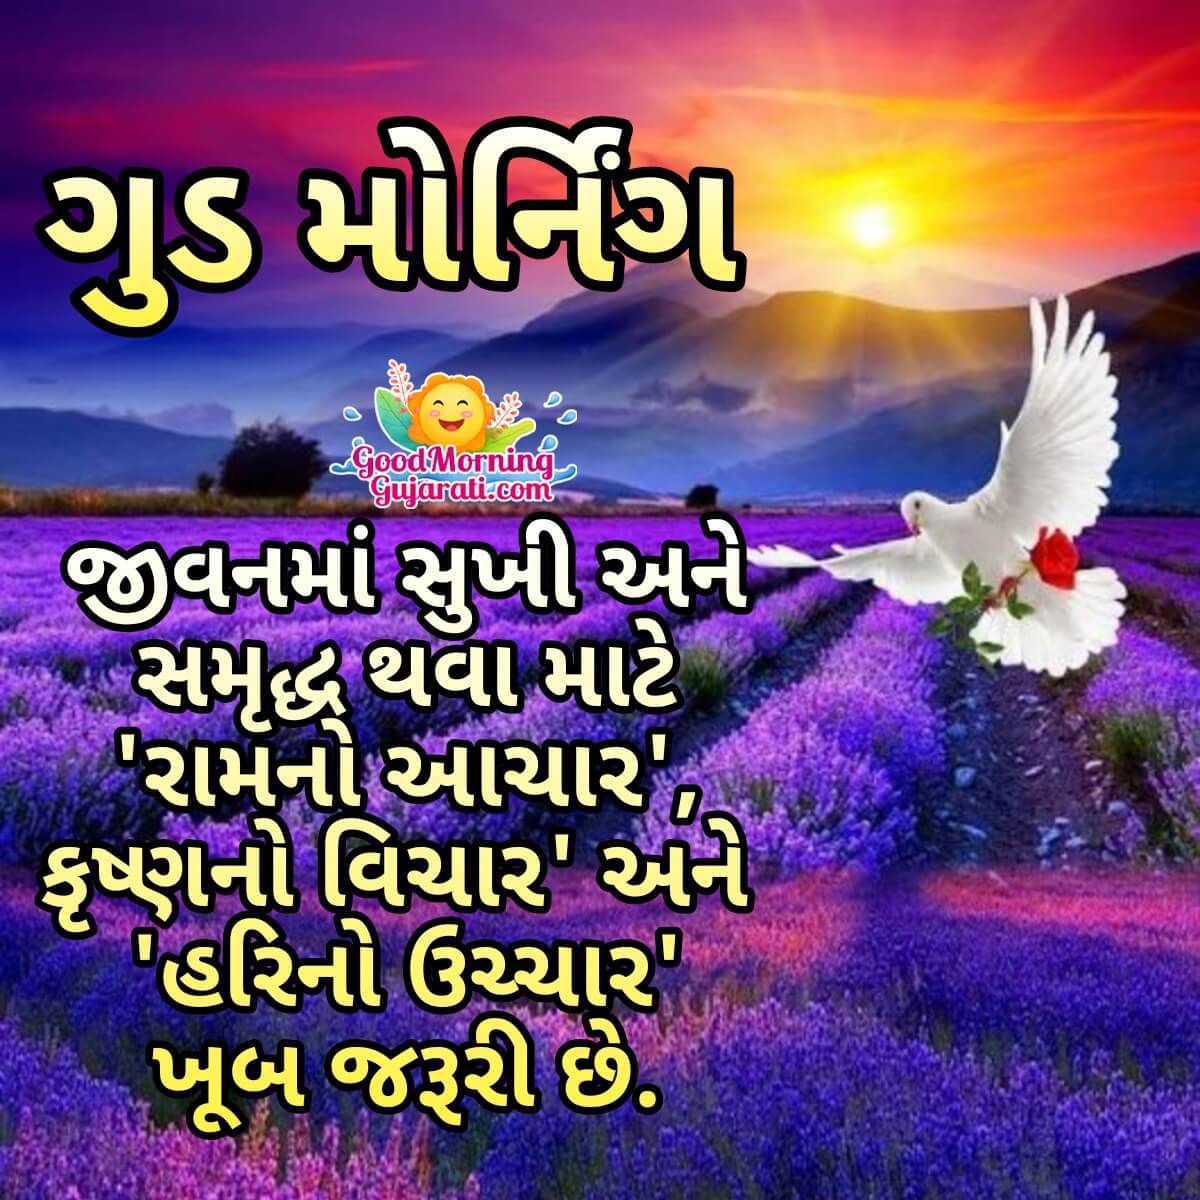 Good Morning Quotes In Gujarati - Good Morning Wishes & Images in ...